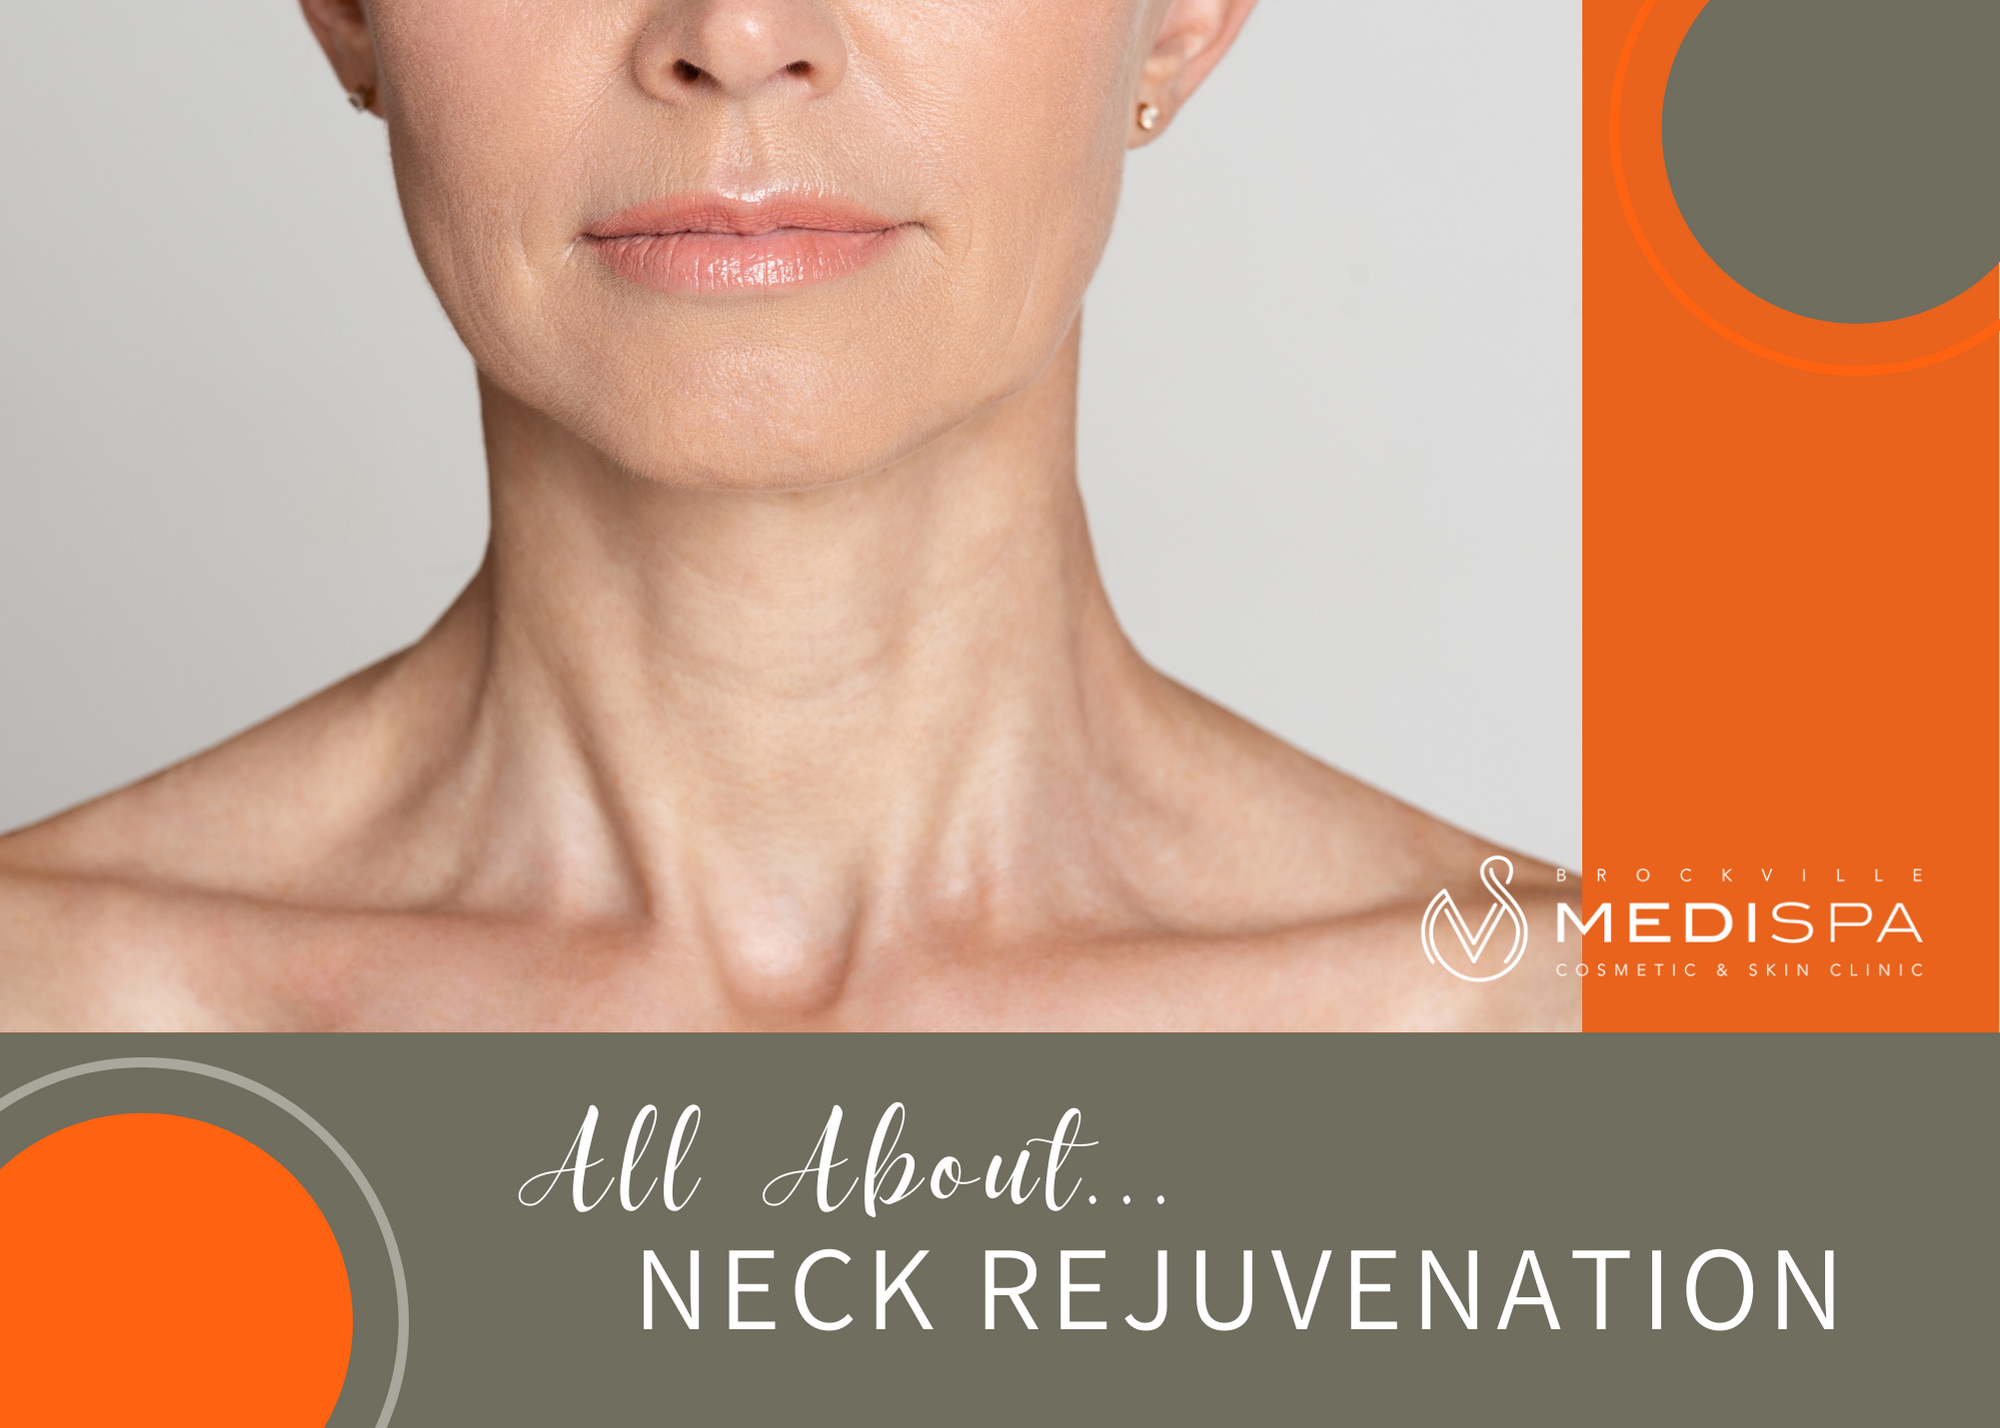 How to Get Firmer, Smoother and More Contoured Skin on Your Neck